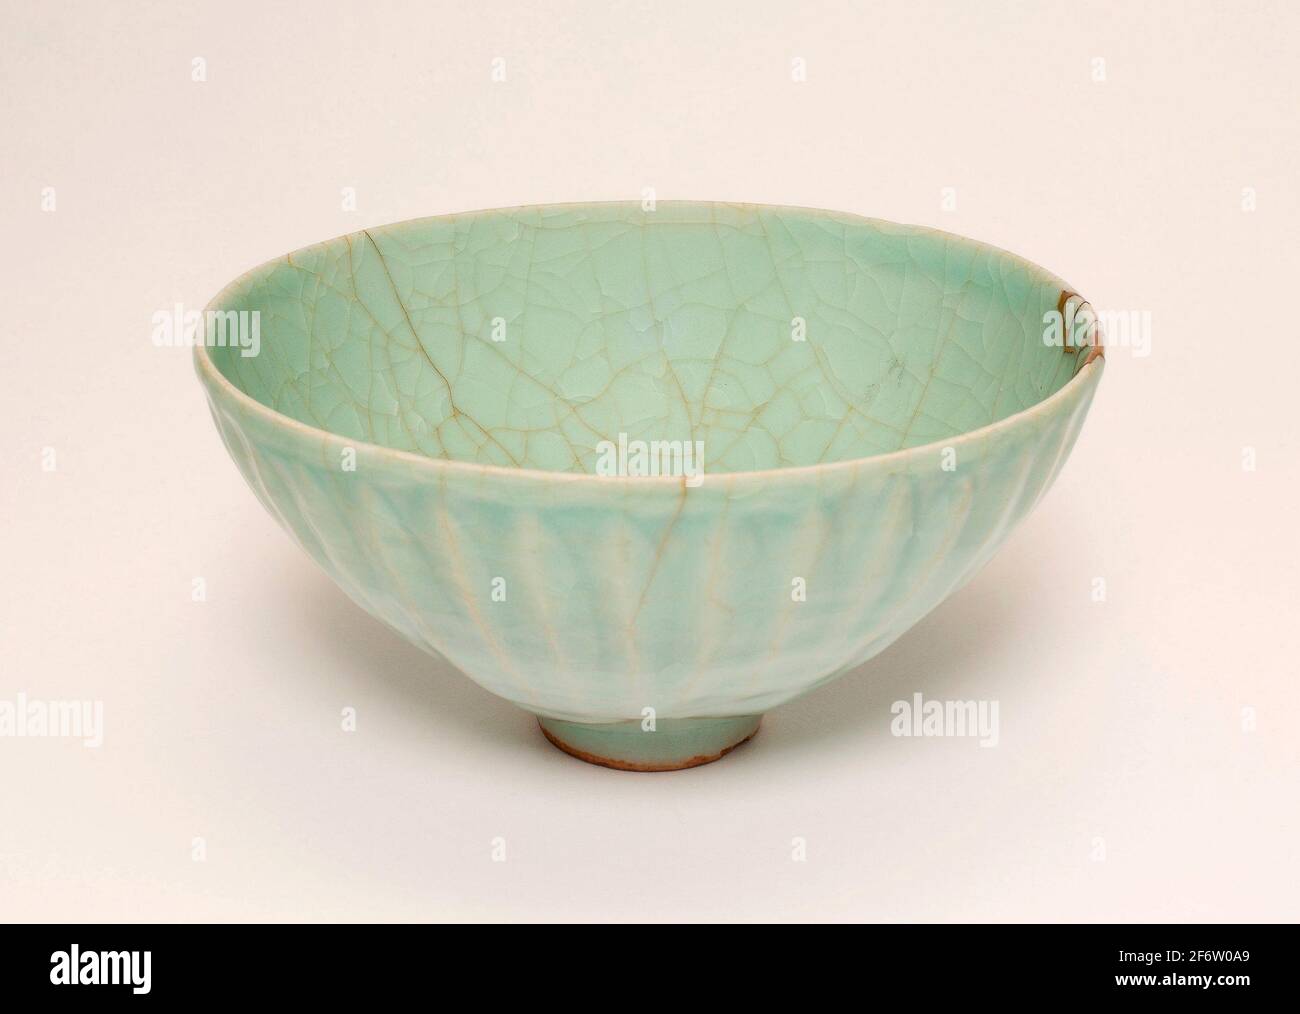 https://c8.alamy.com/comp/2F6W0A9/fluted-bowl-song-dynasty-9601279-or-later-china-celadon-glazed-stoneware-with-underglaze-molded-decoration-960-ad1300-2F6W0A9.jpg